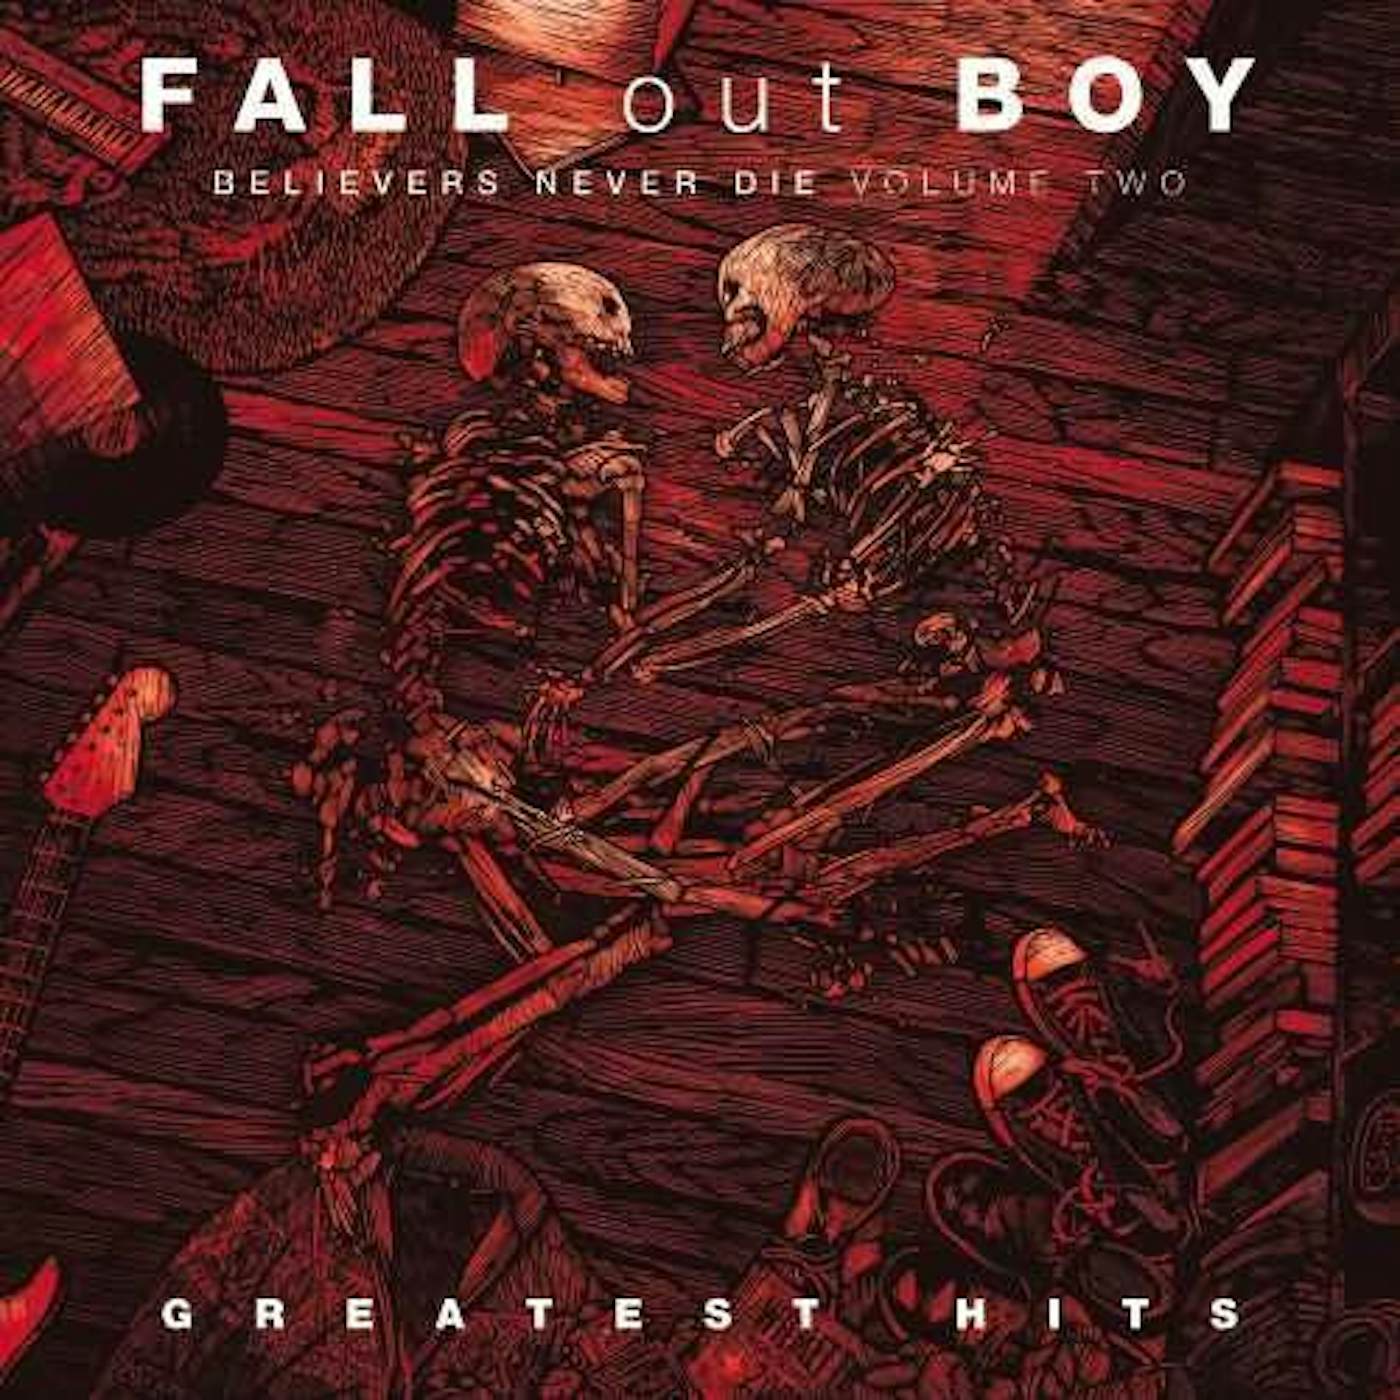 Fall Out Boy BELIEVERS NEVER DIE VOL 2 Vinyl Record